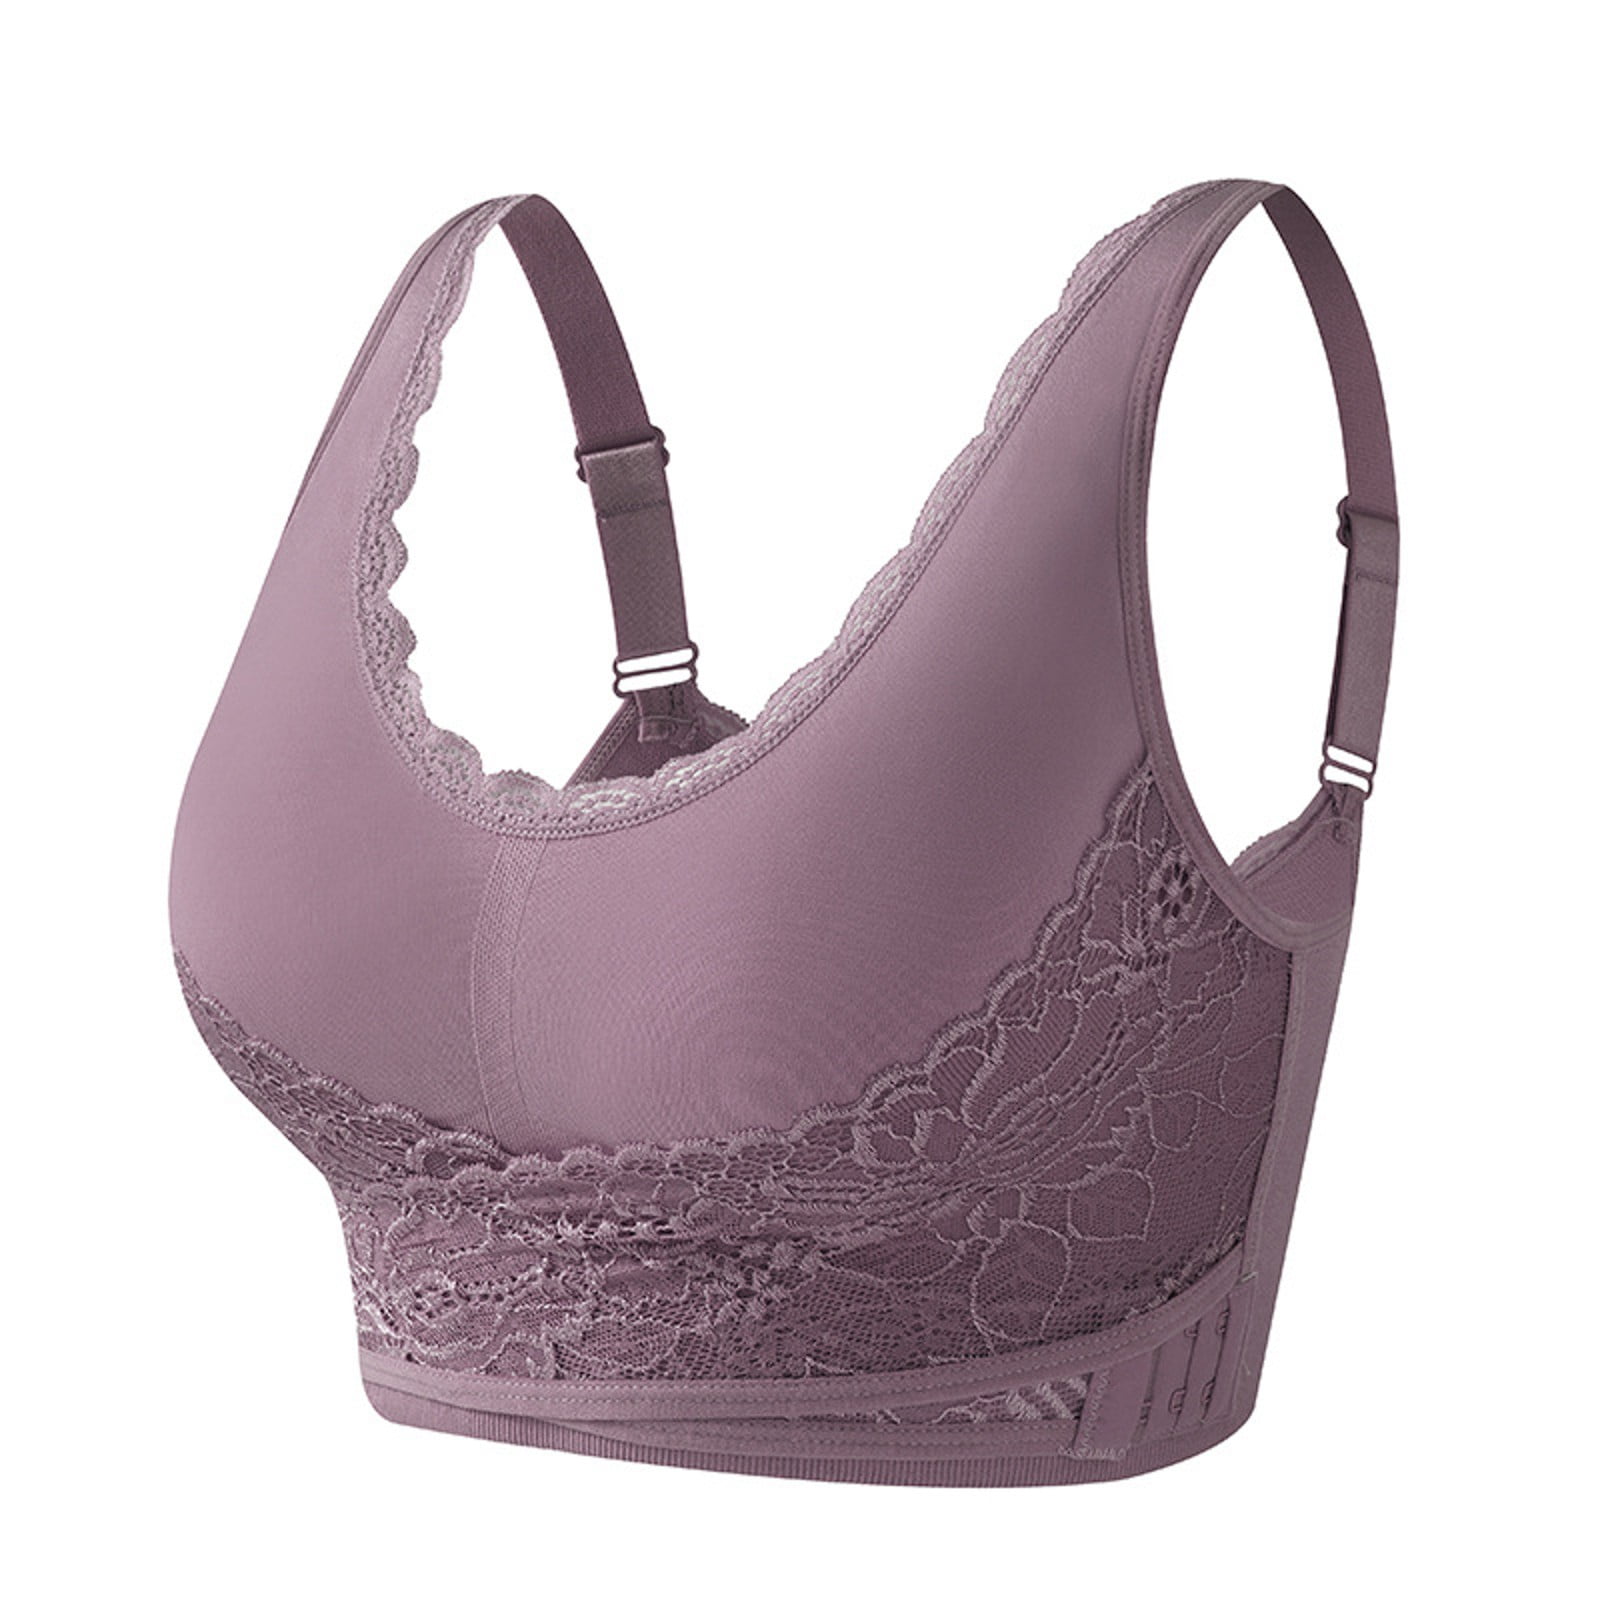 Vedolay Bra Sports Bra for Women with Sewn-in Pads, High Impact